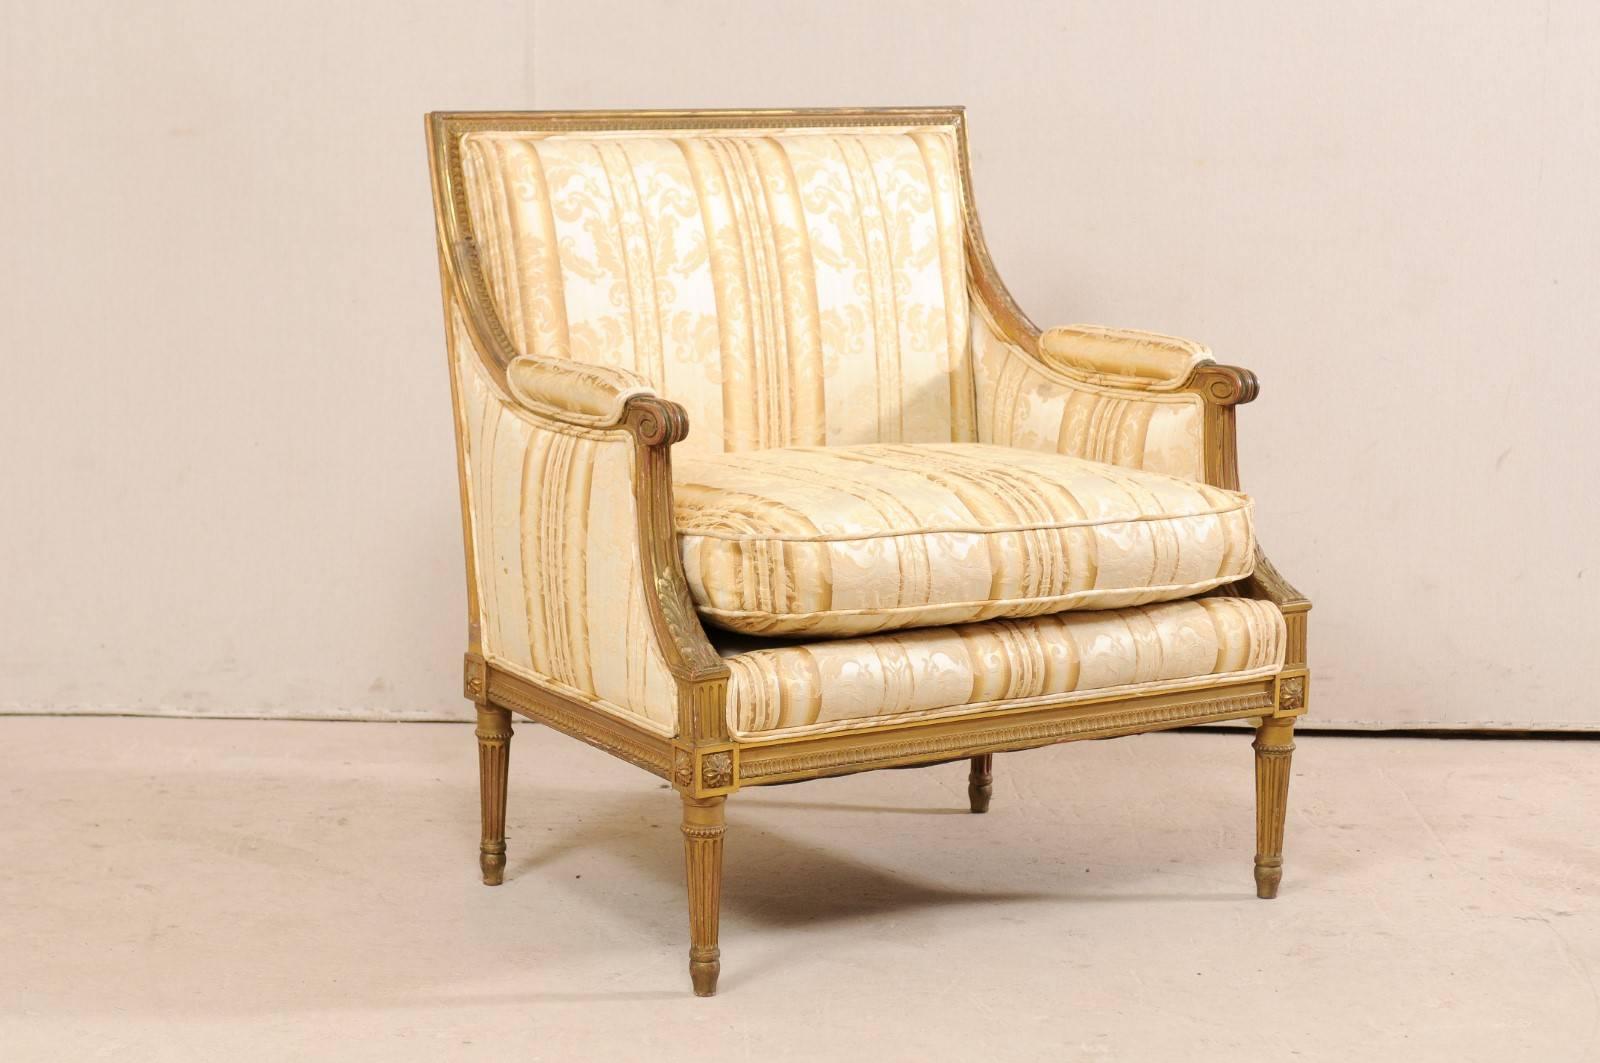 A French Louis XVI style marquise from the turn of the century (late 19th-early 20th century). This antique French painted marquise (a wide bergère chair) has traces of gilding and showcases all the Louis XVI decorative vocabulary with tightly